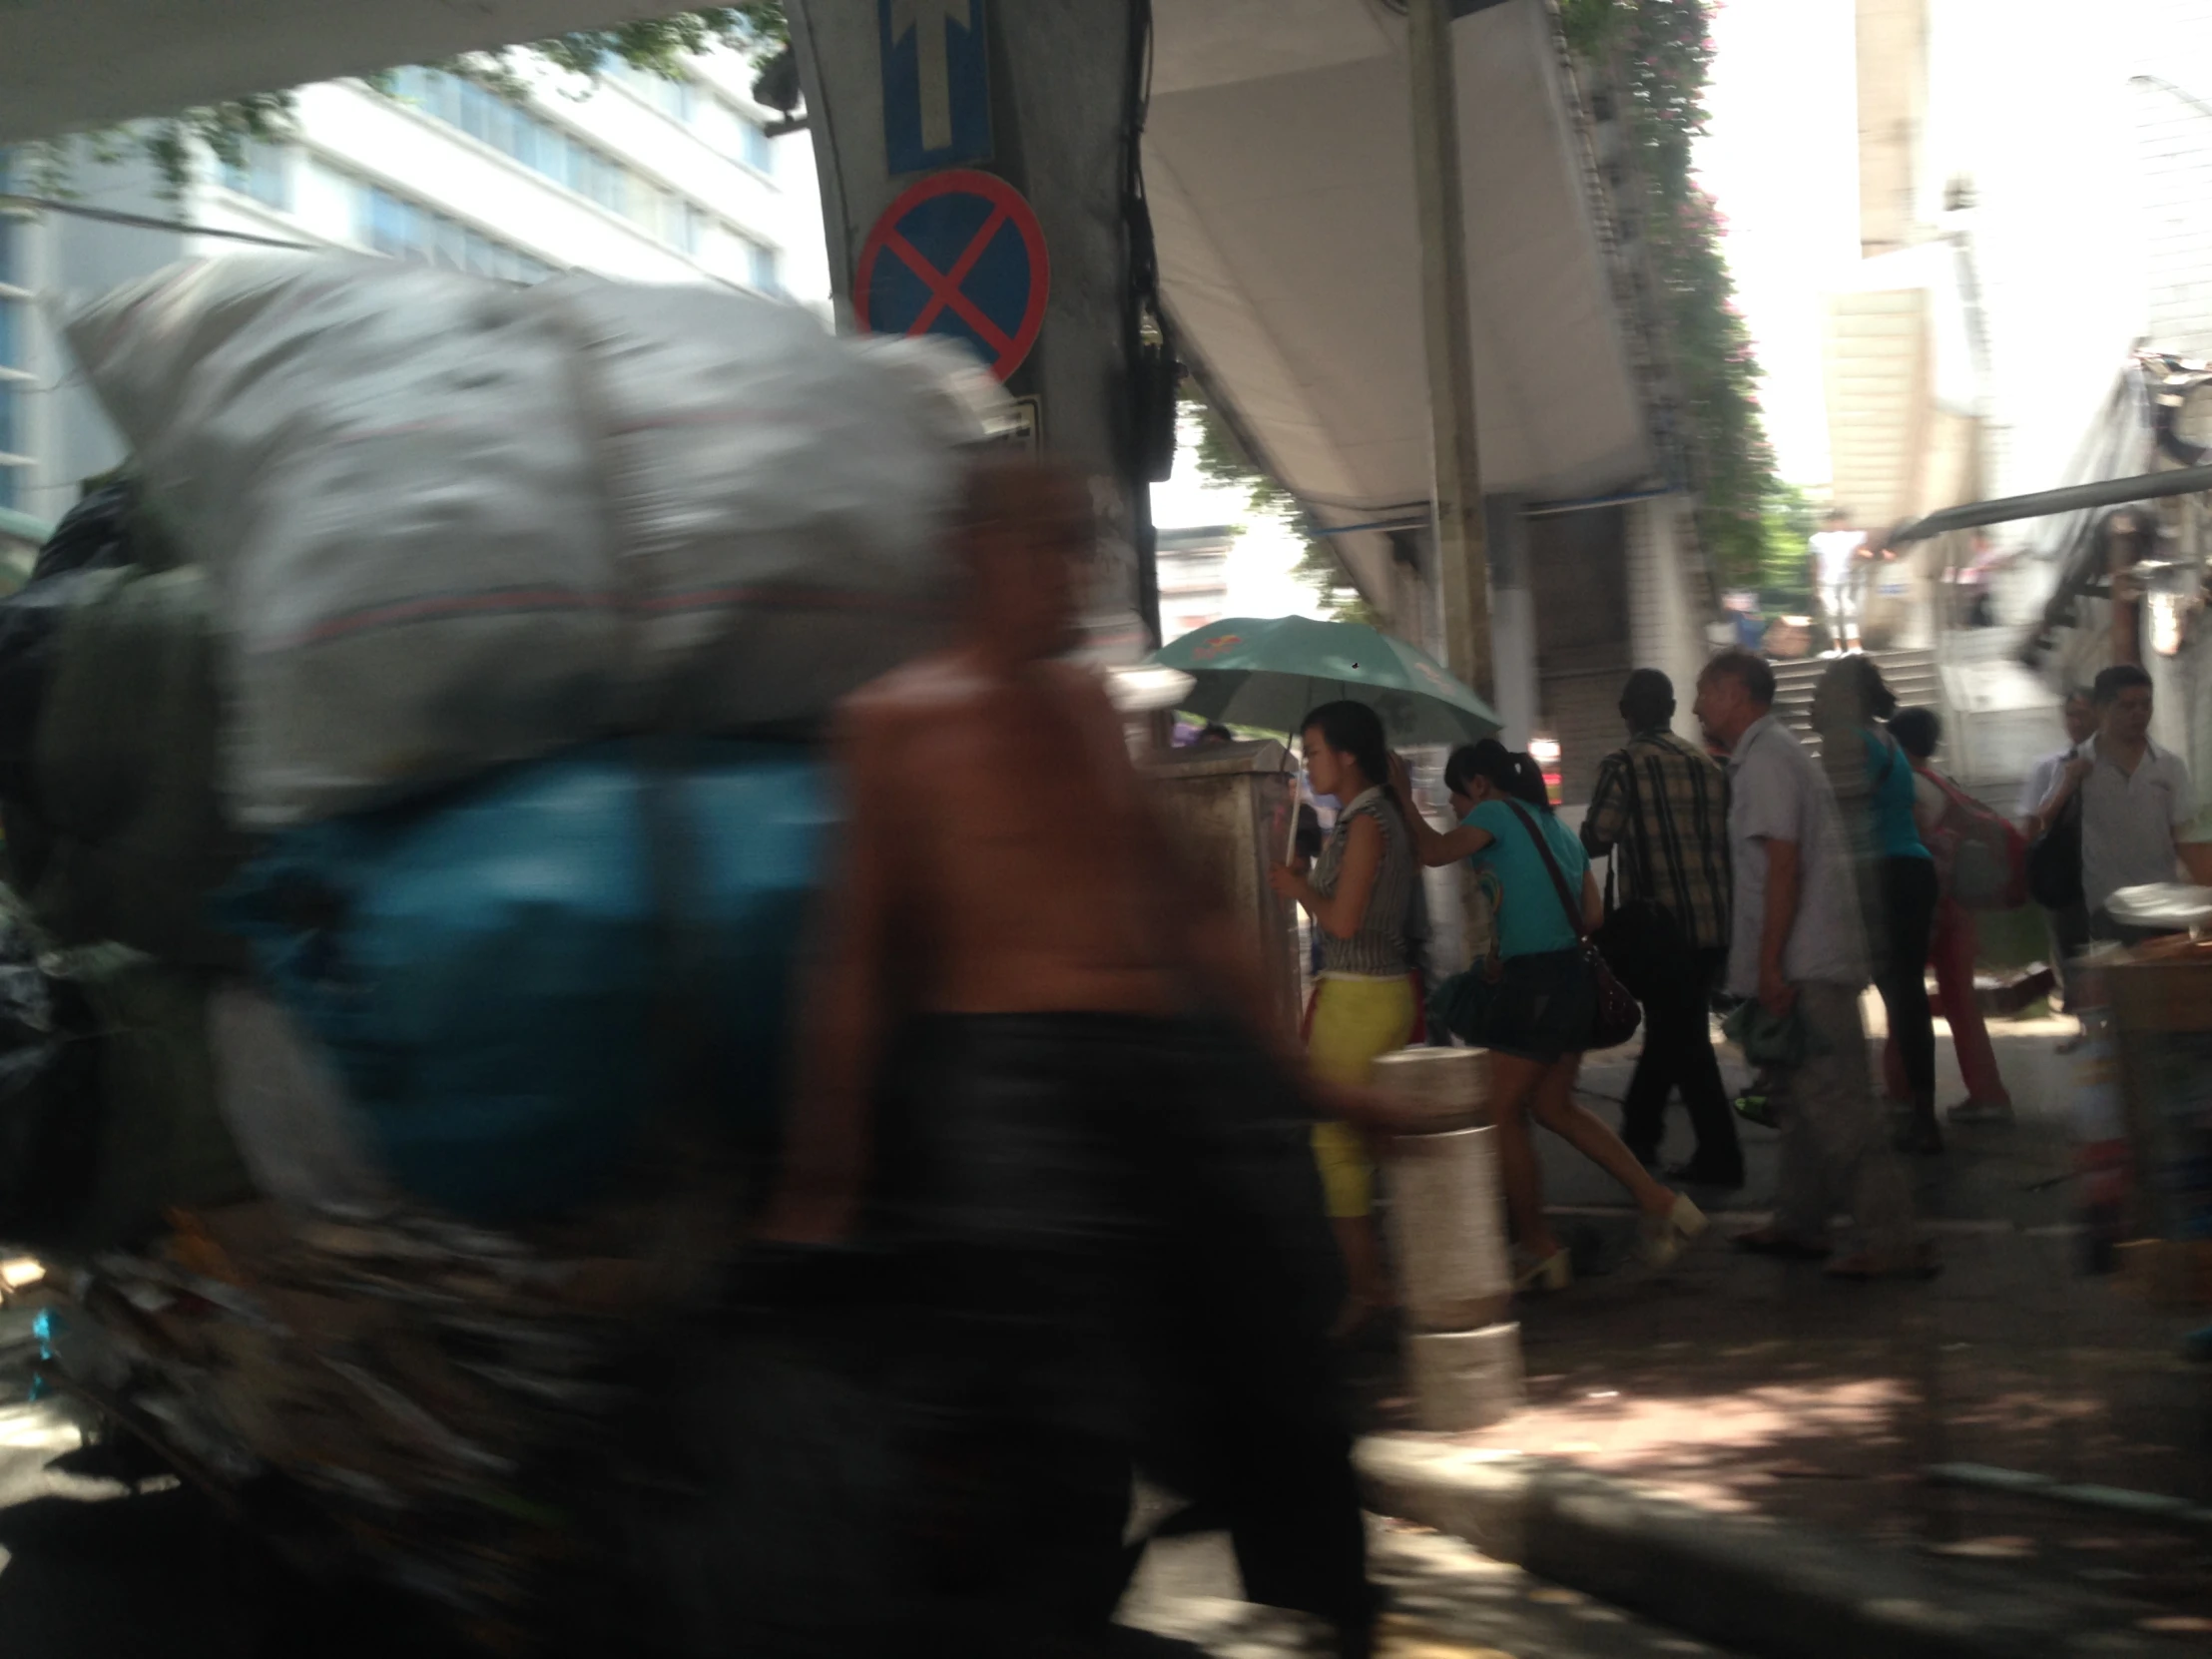 people are walking in the street carrying large bags